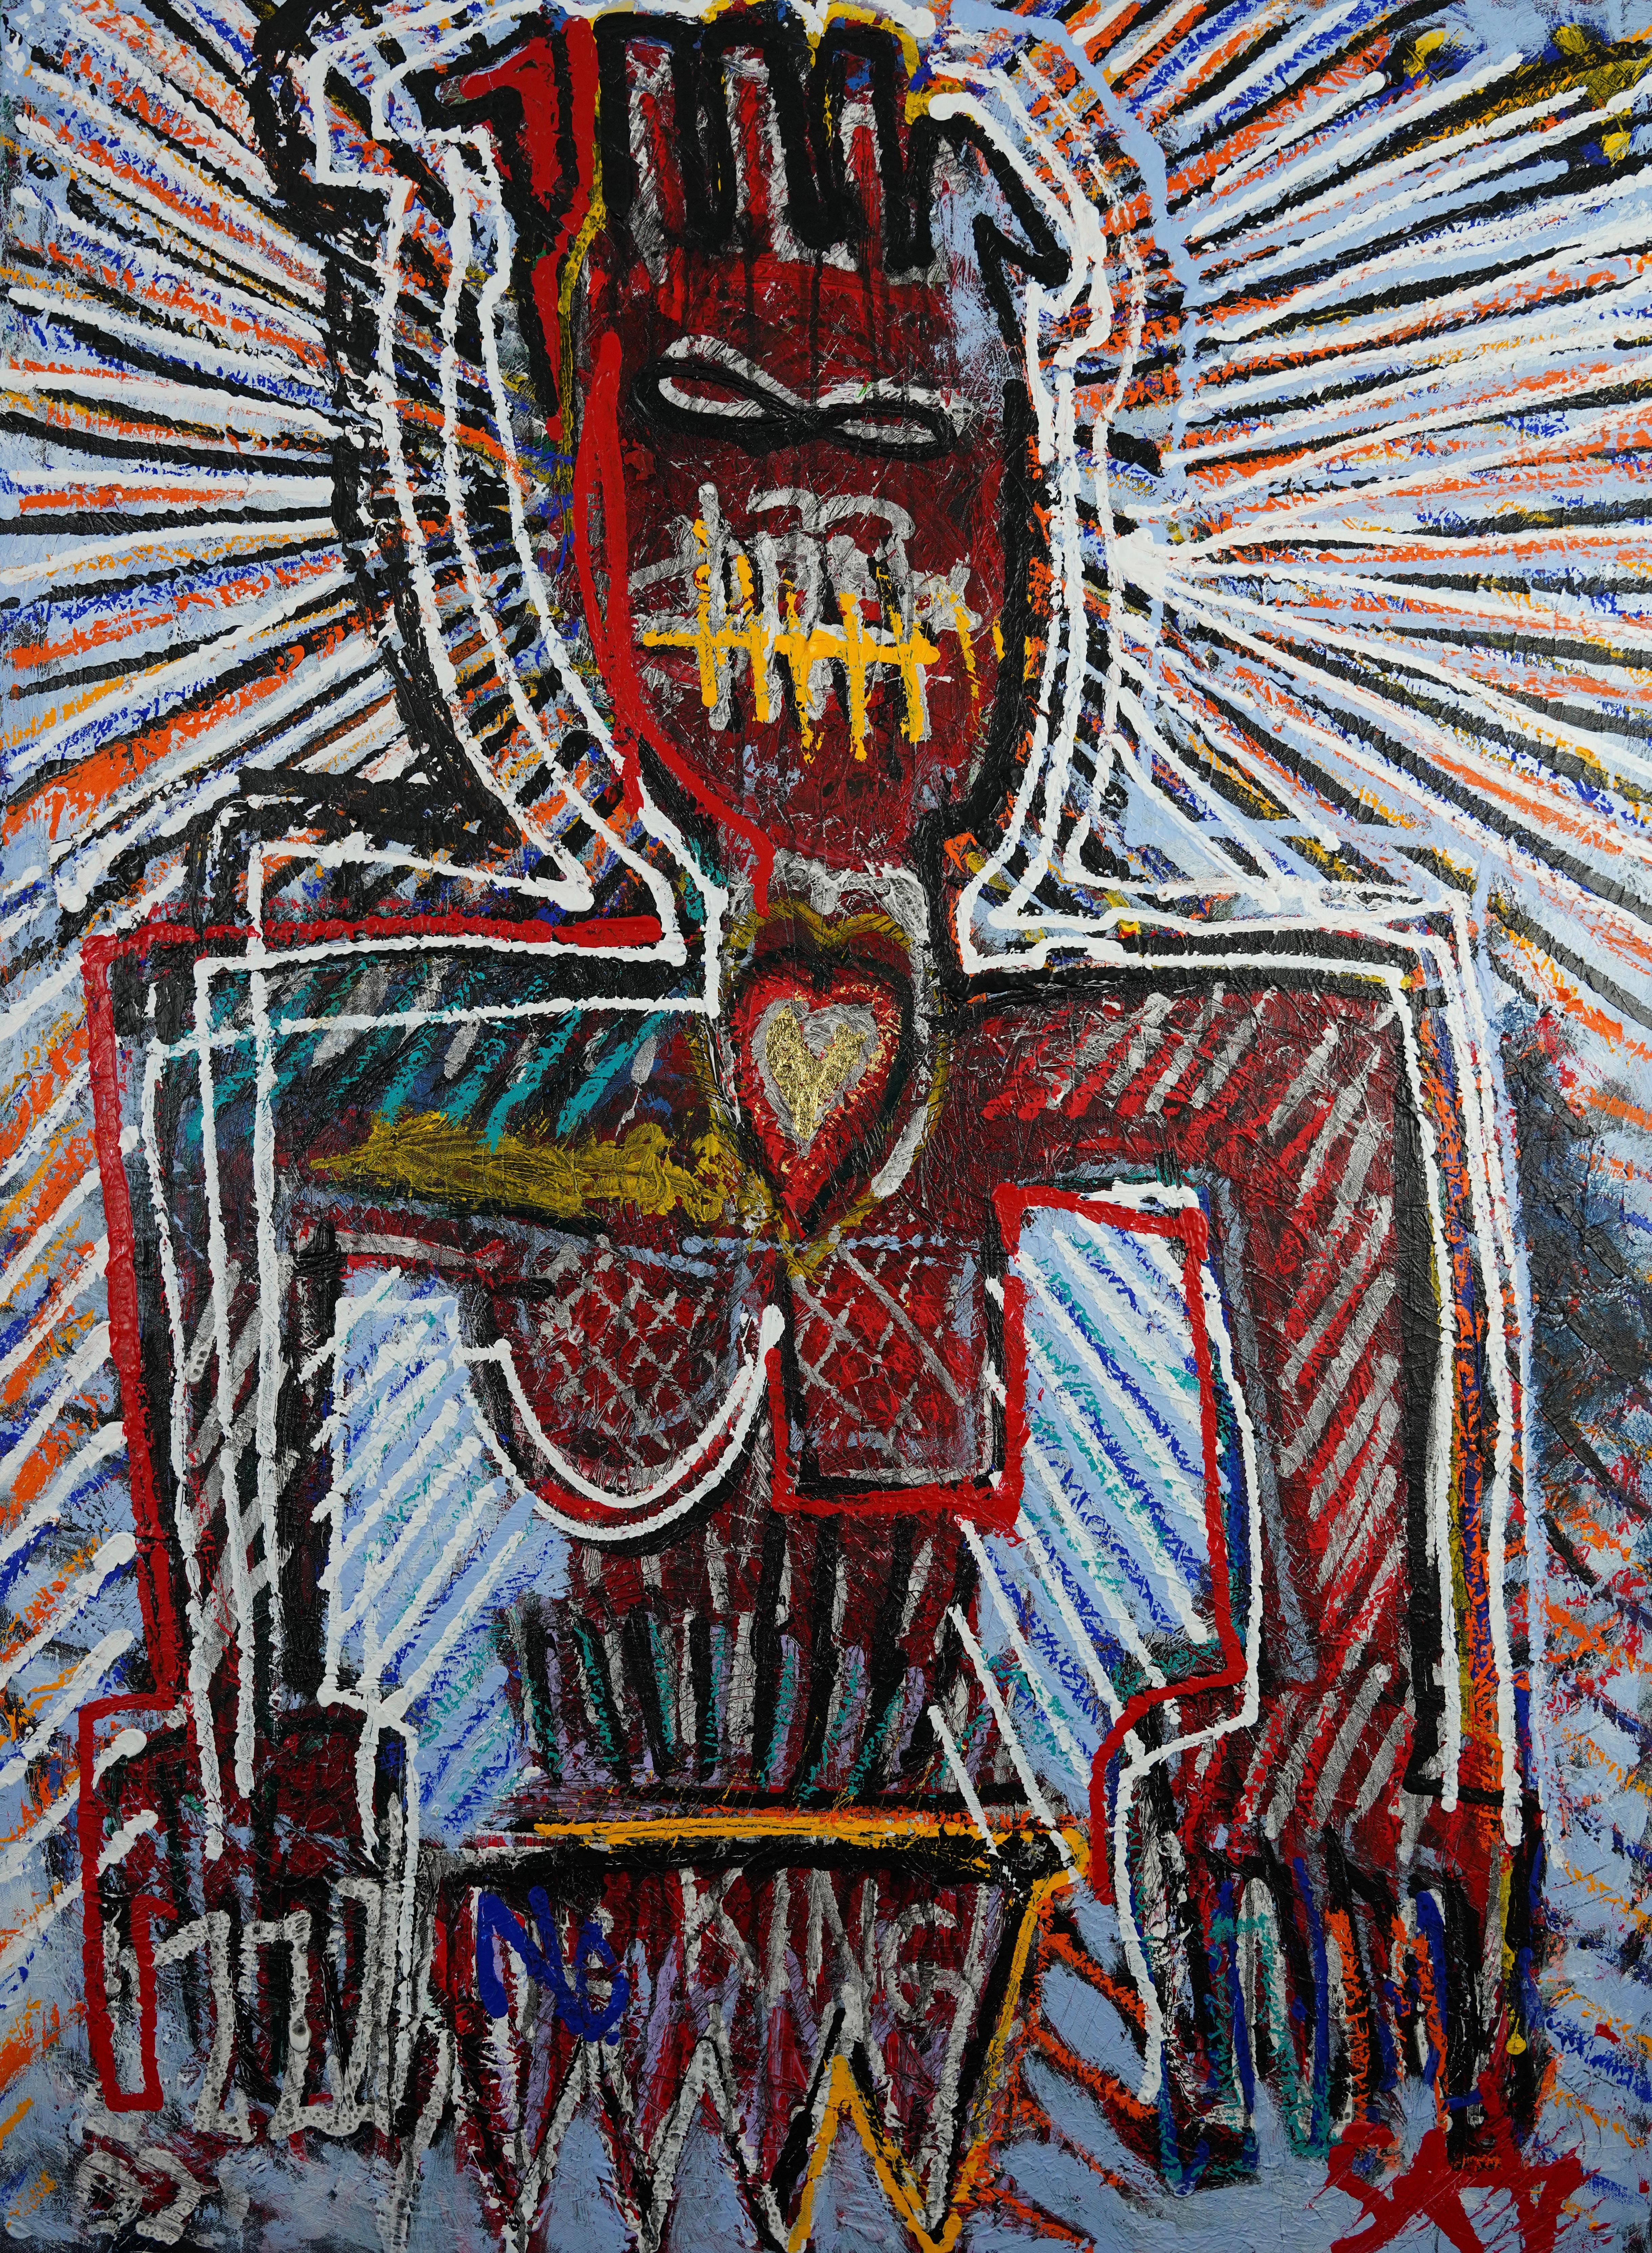 "Westside Watchdawg : The Golden Hearted".  Large Neo Expressionist Oil Painting